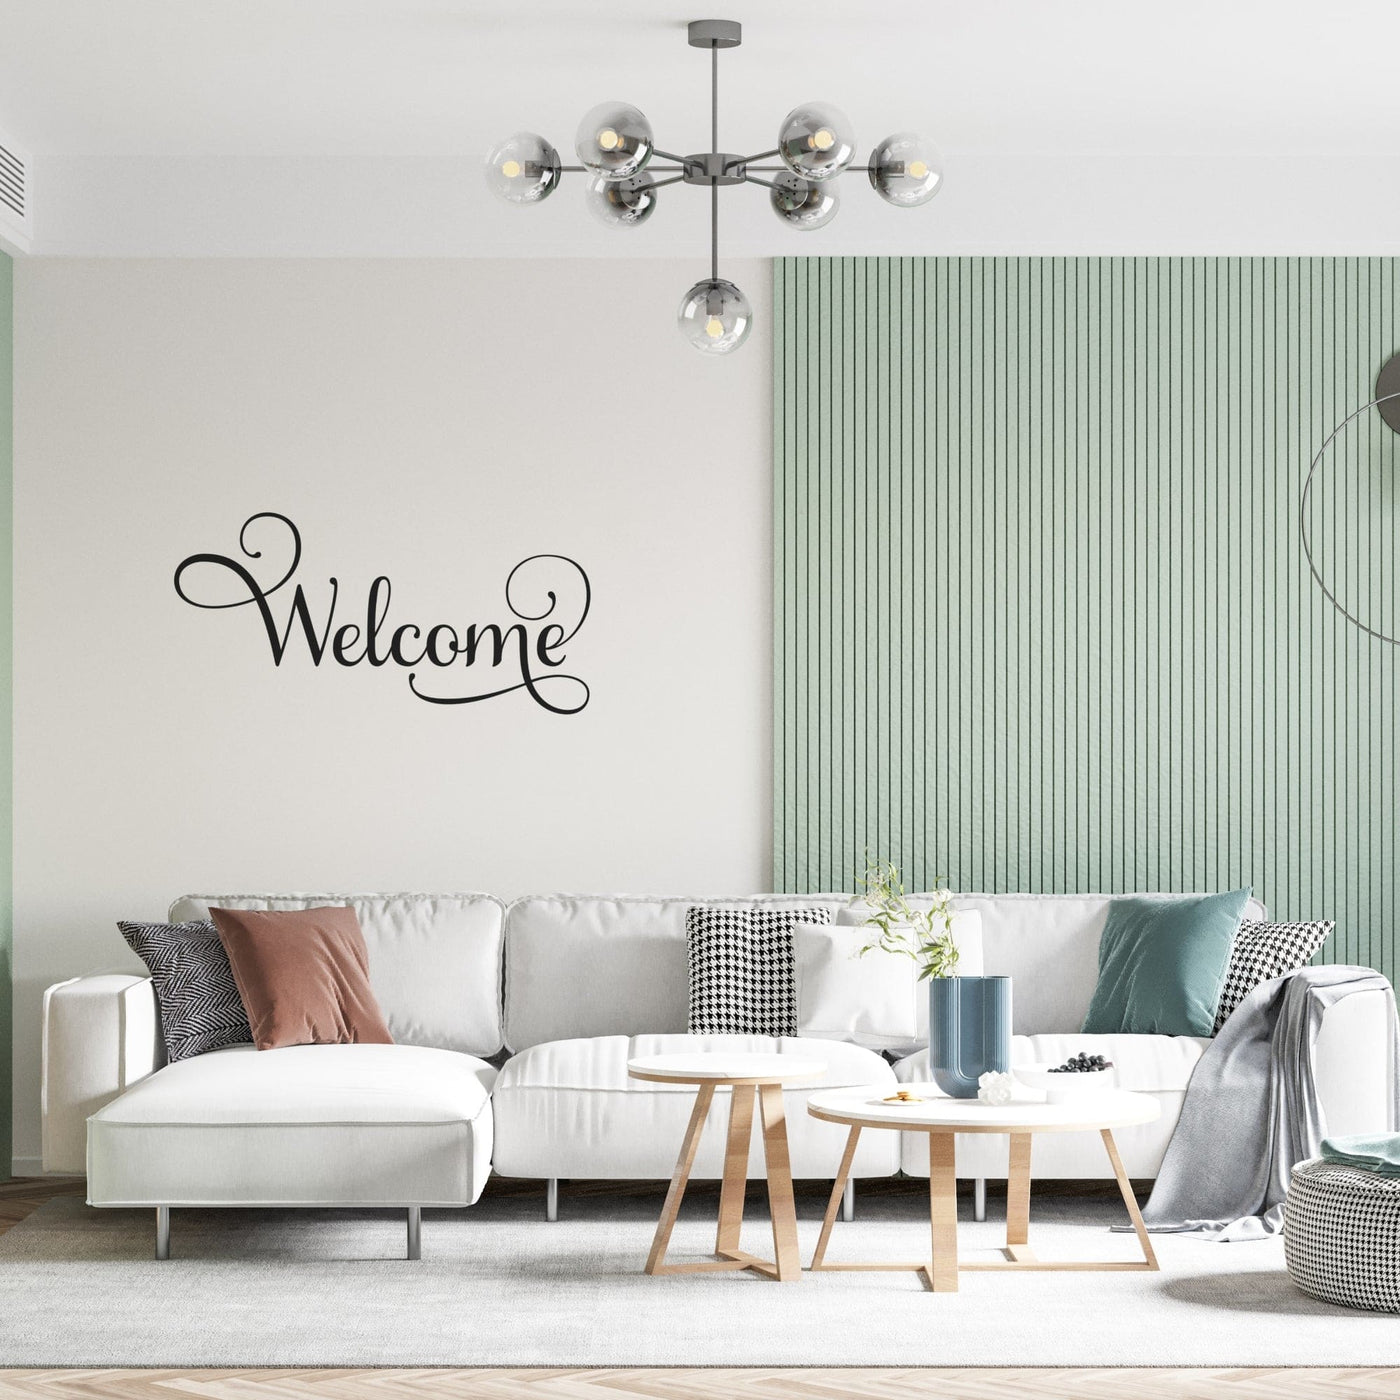 Decor - Welcome Removable Vinyl Wall Decal Easy Peel And Stick Wall Art